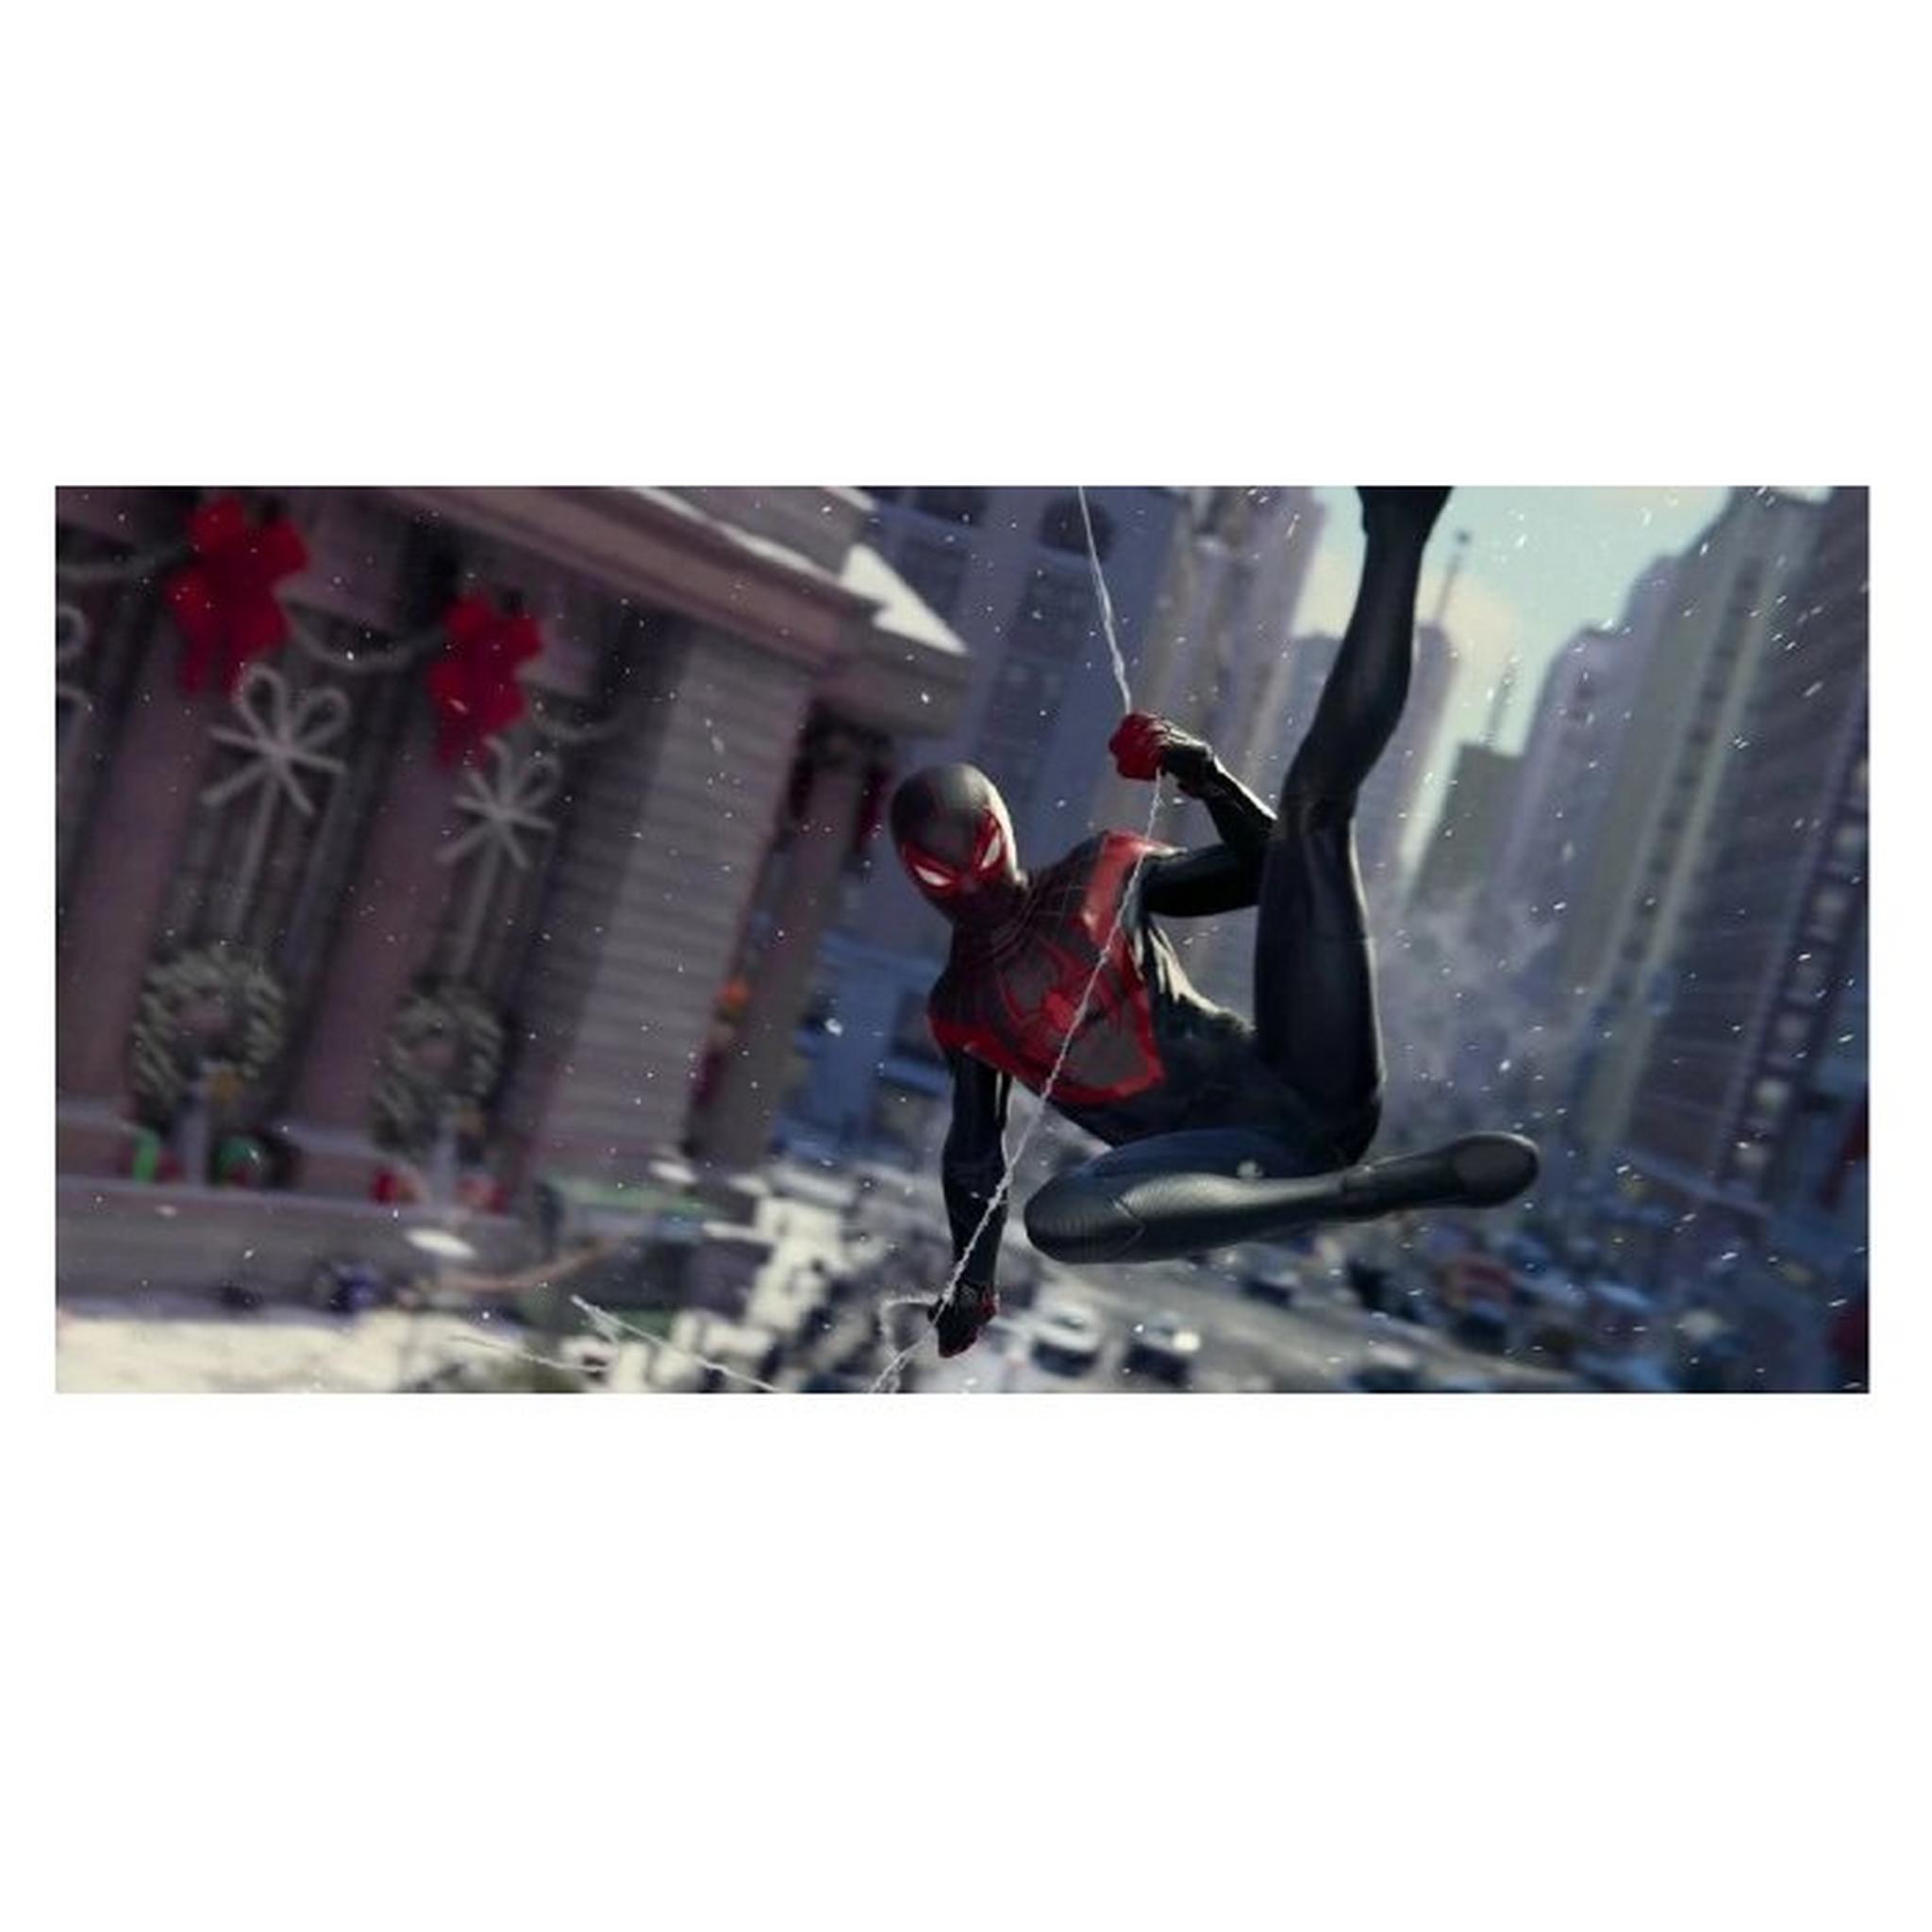 Marvels Spiderman Miles Morales Ultimate Edition - PS5 Game